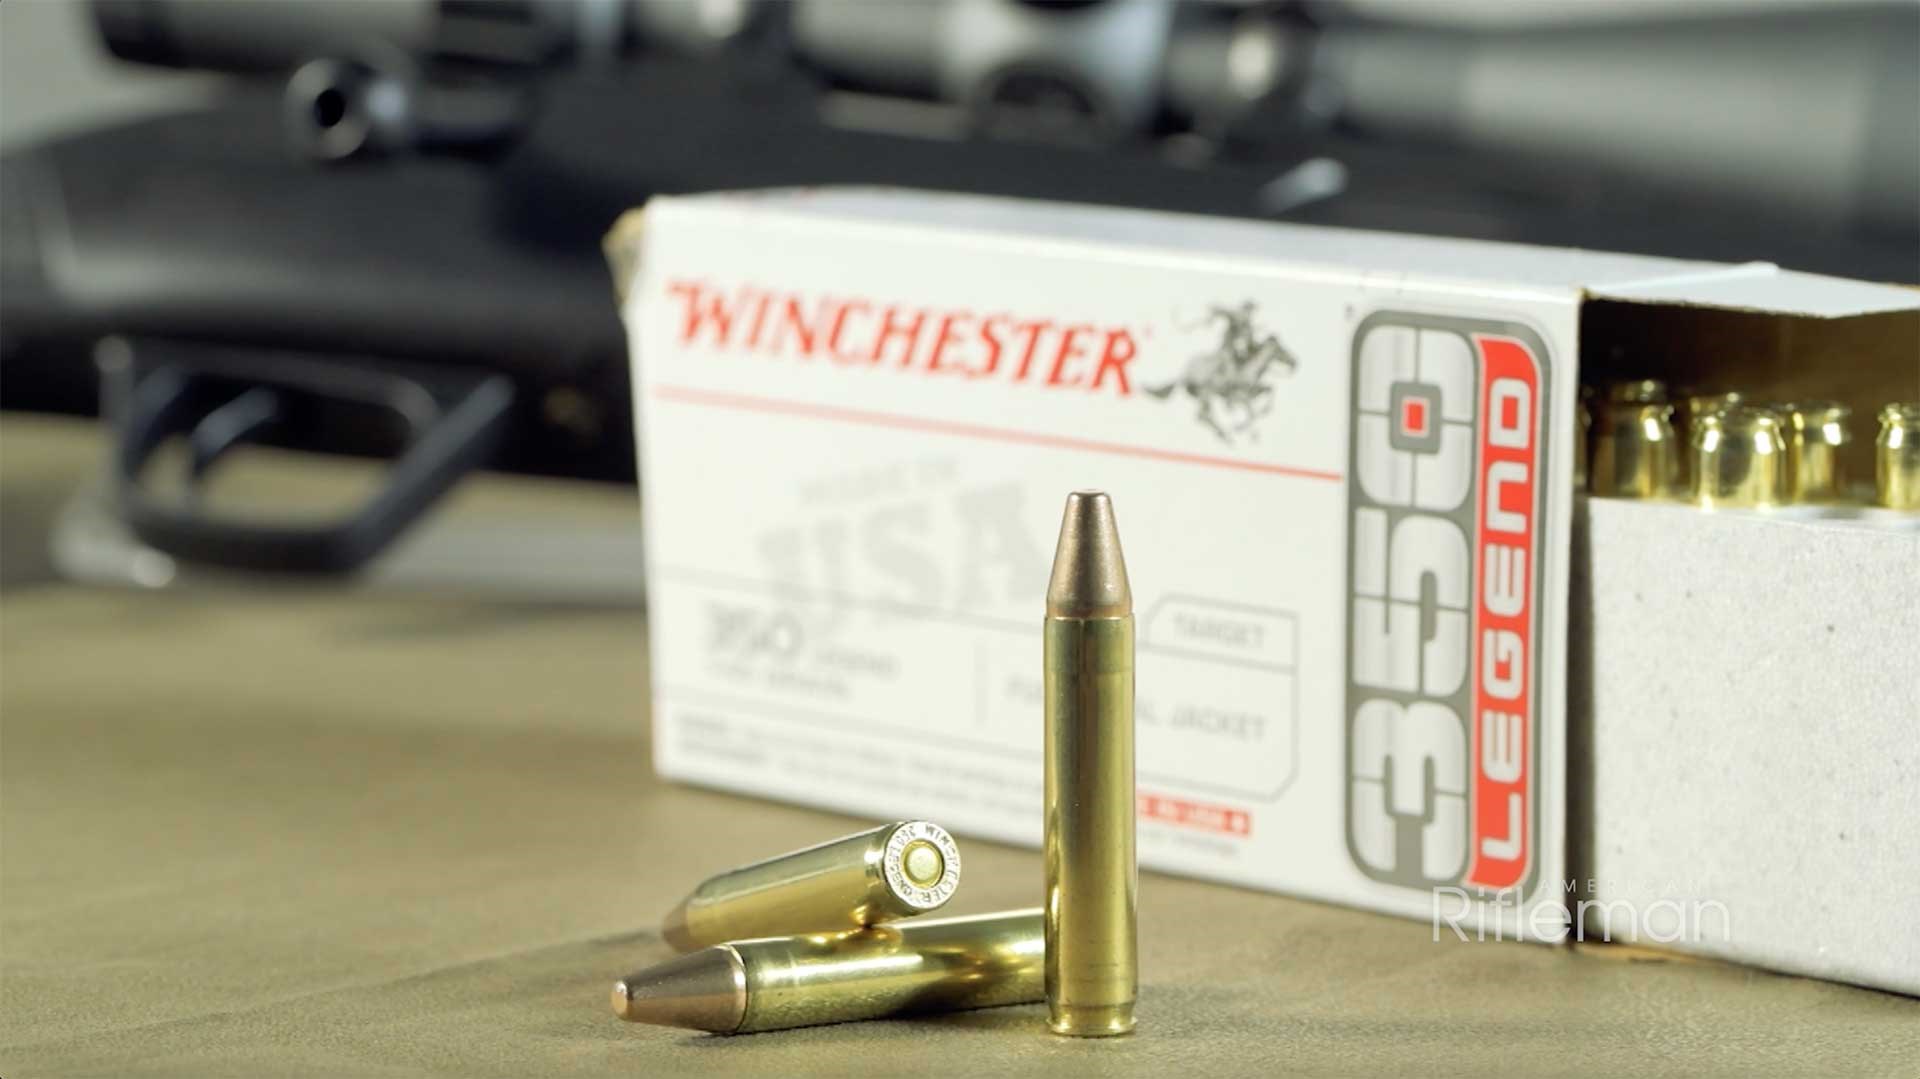 Several cartridges of Winchester's 350 Legend ammunition sitting on a table in front of an open, white box.